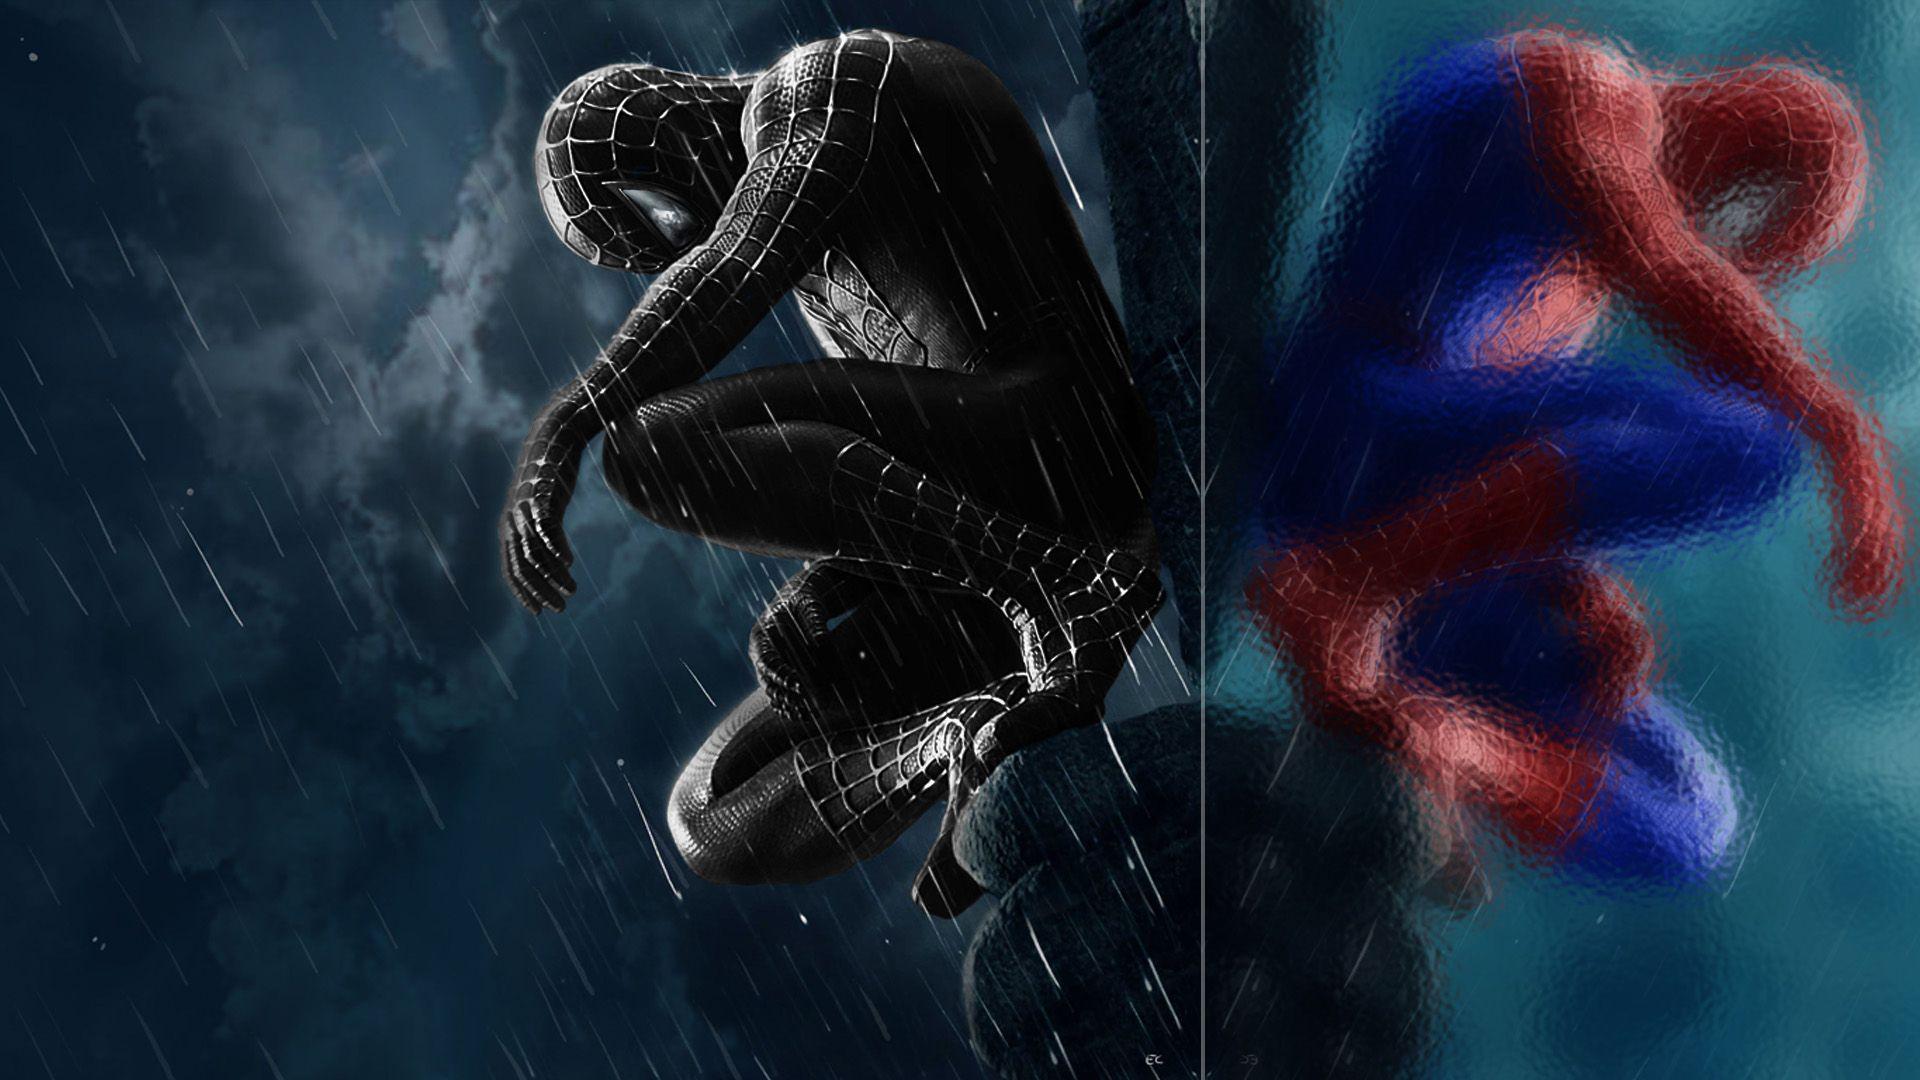 Black Spiderman Wallpapers For Pc - Wallpaper Cave